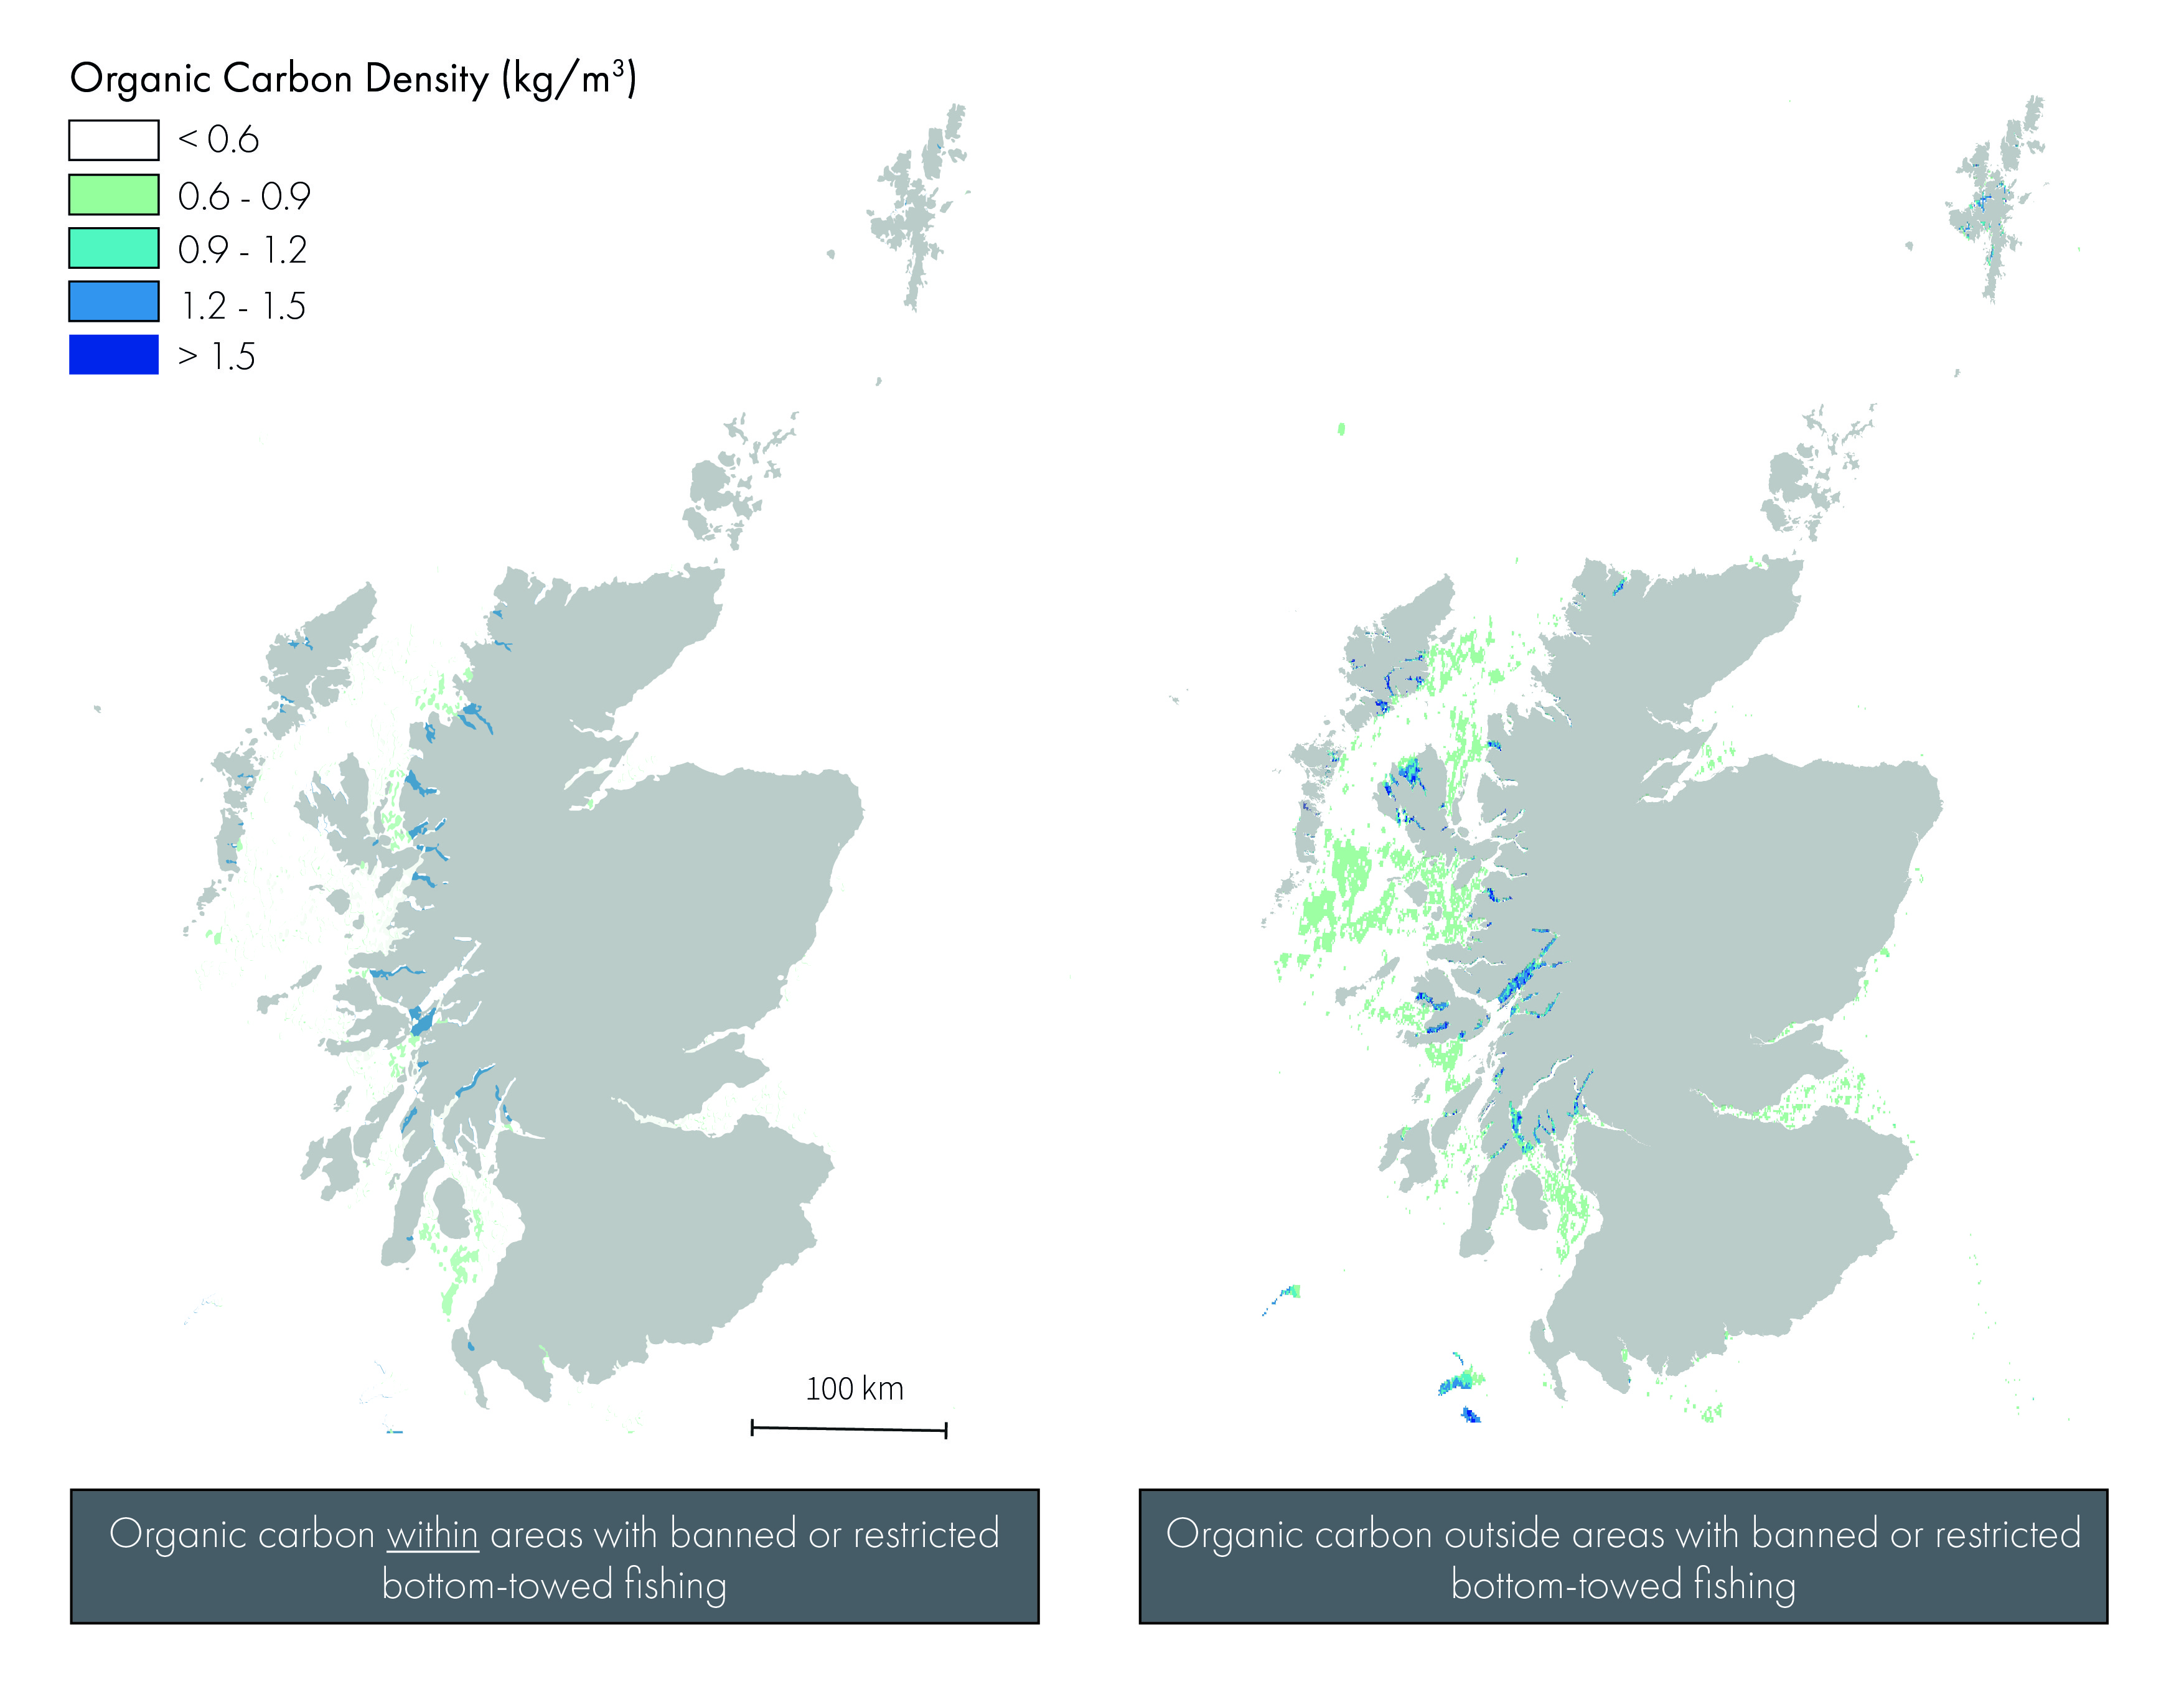 Two maps of Scotland showing organic carbon densities (measured in kg per cubic metre) in and not in areas with banned or restricted bottom-towed fishing.